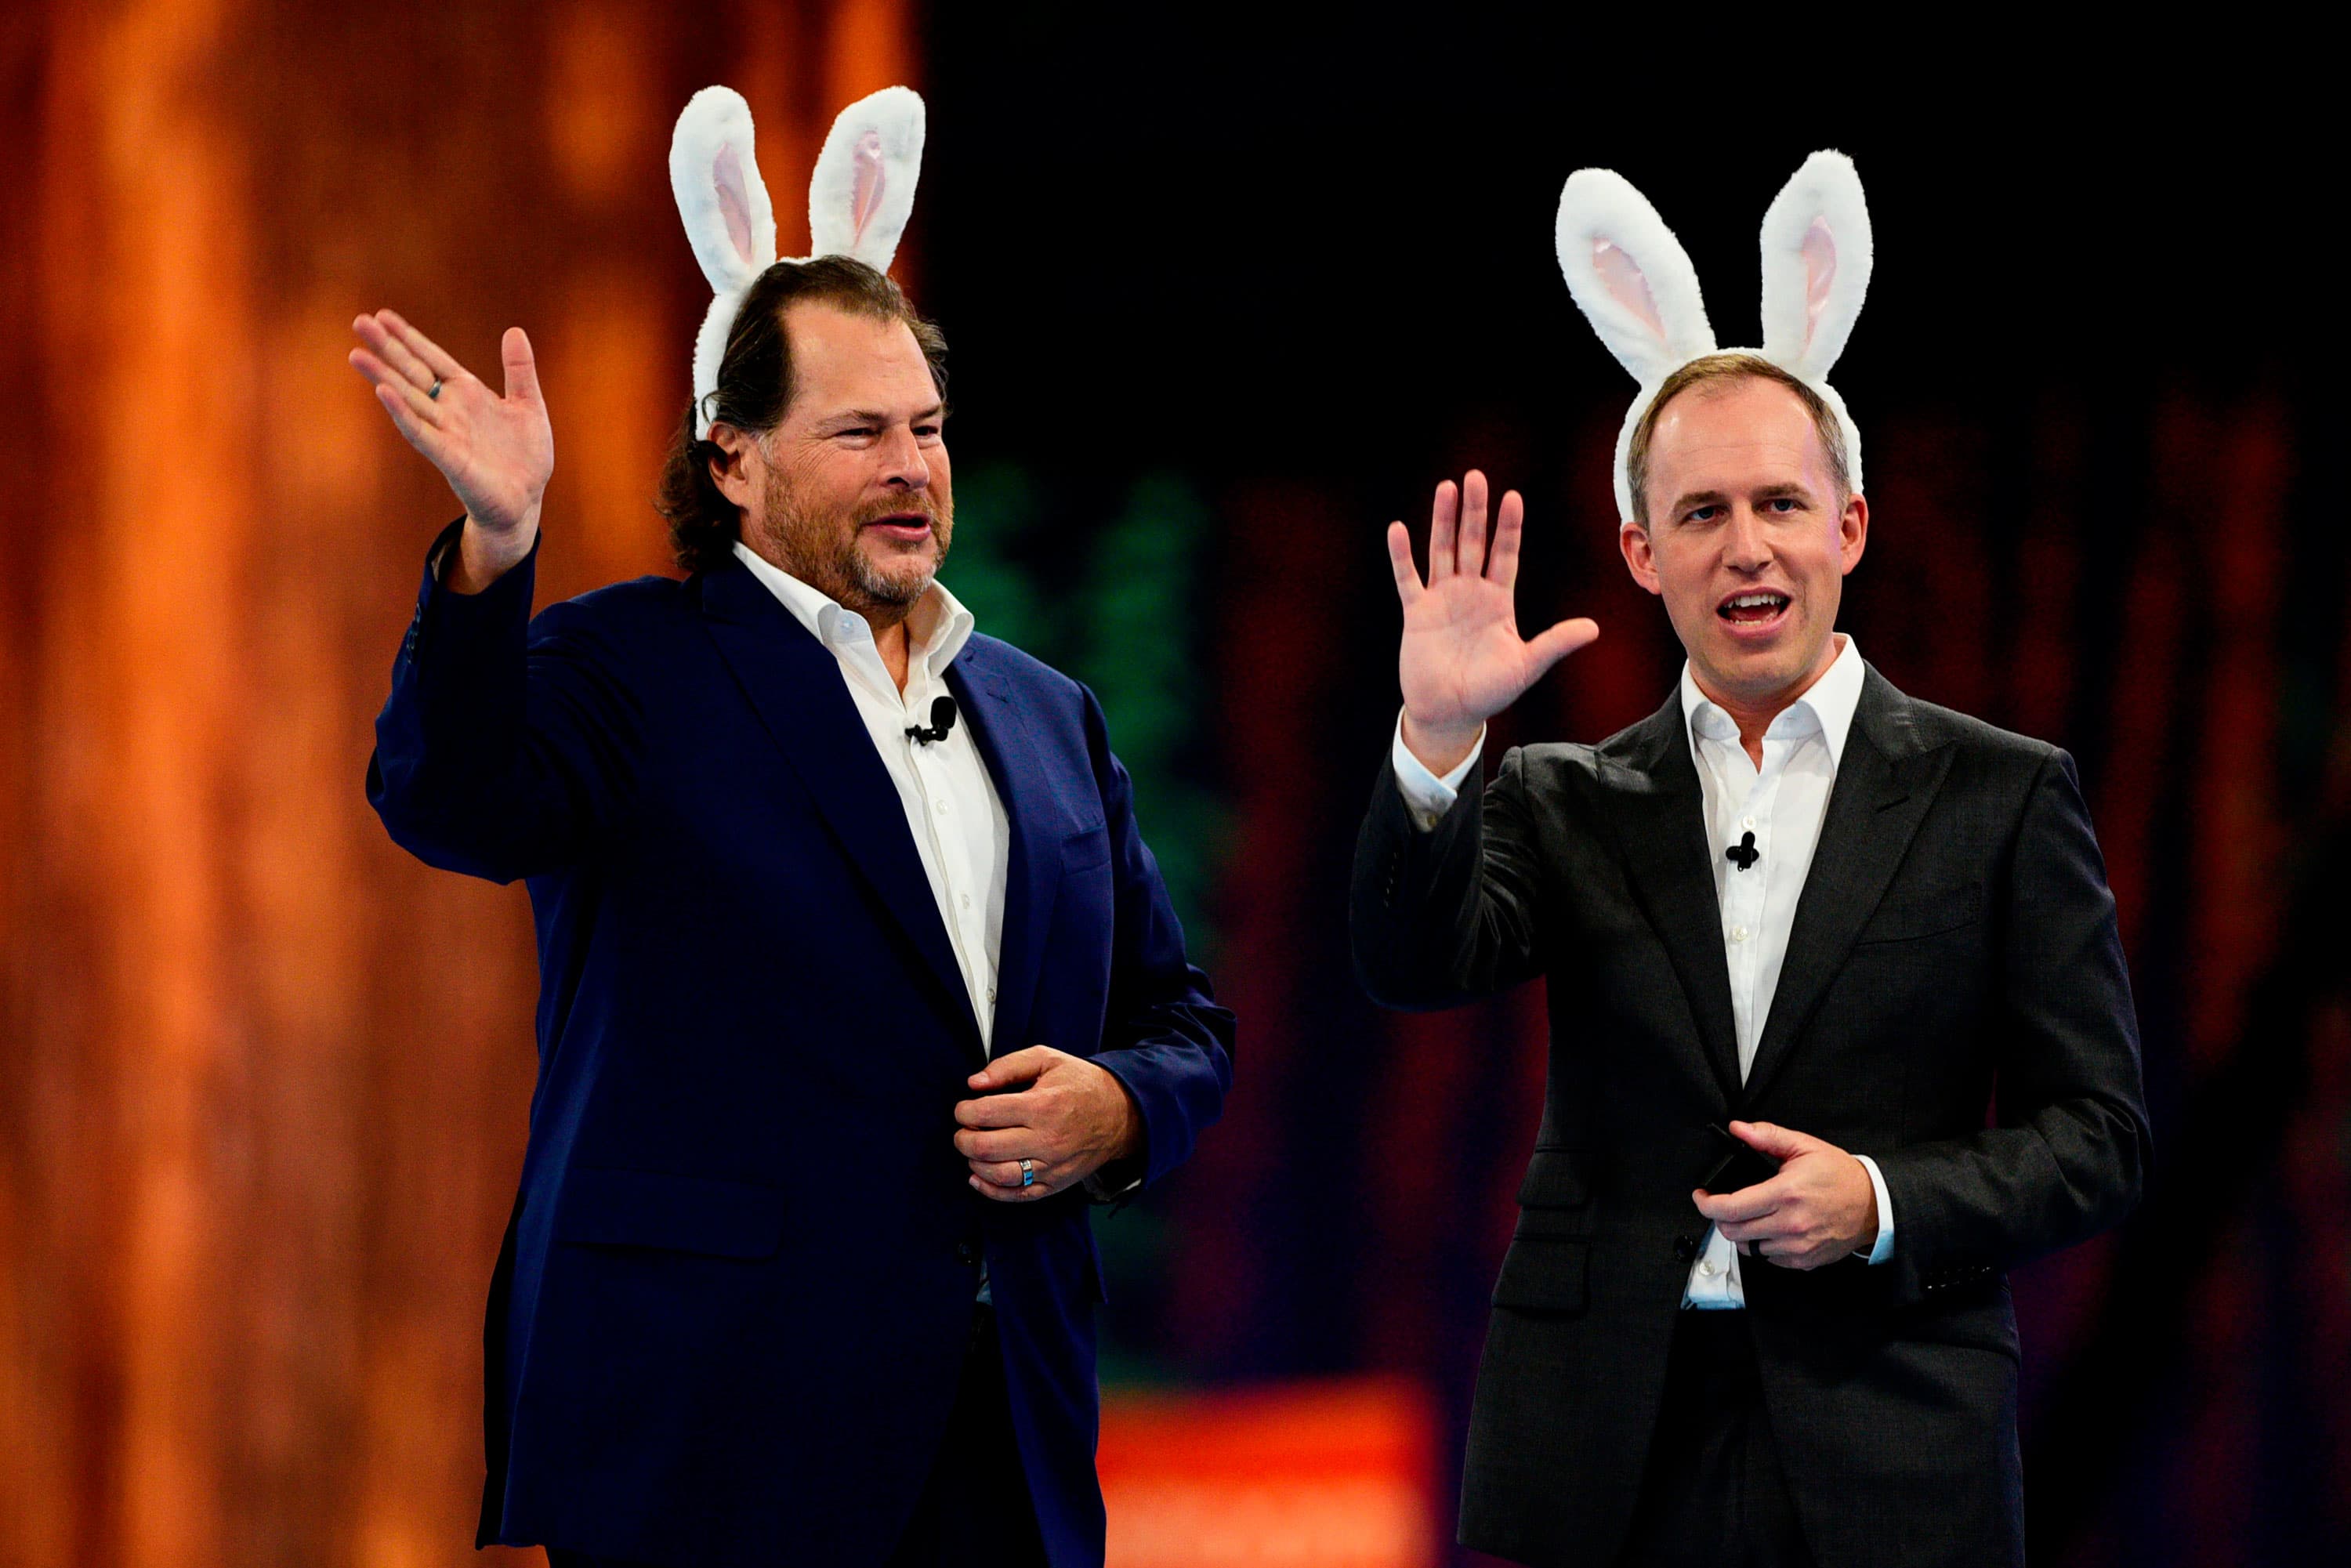 Jim Cramer sat down with the CEOs of Salesforce and Slack this week — here are our takeaways